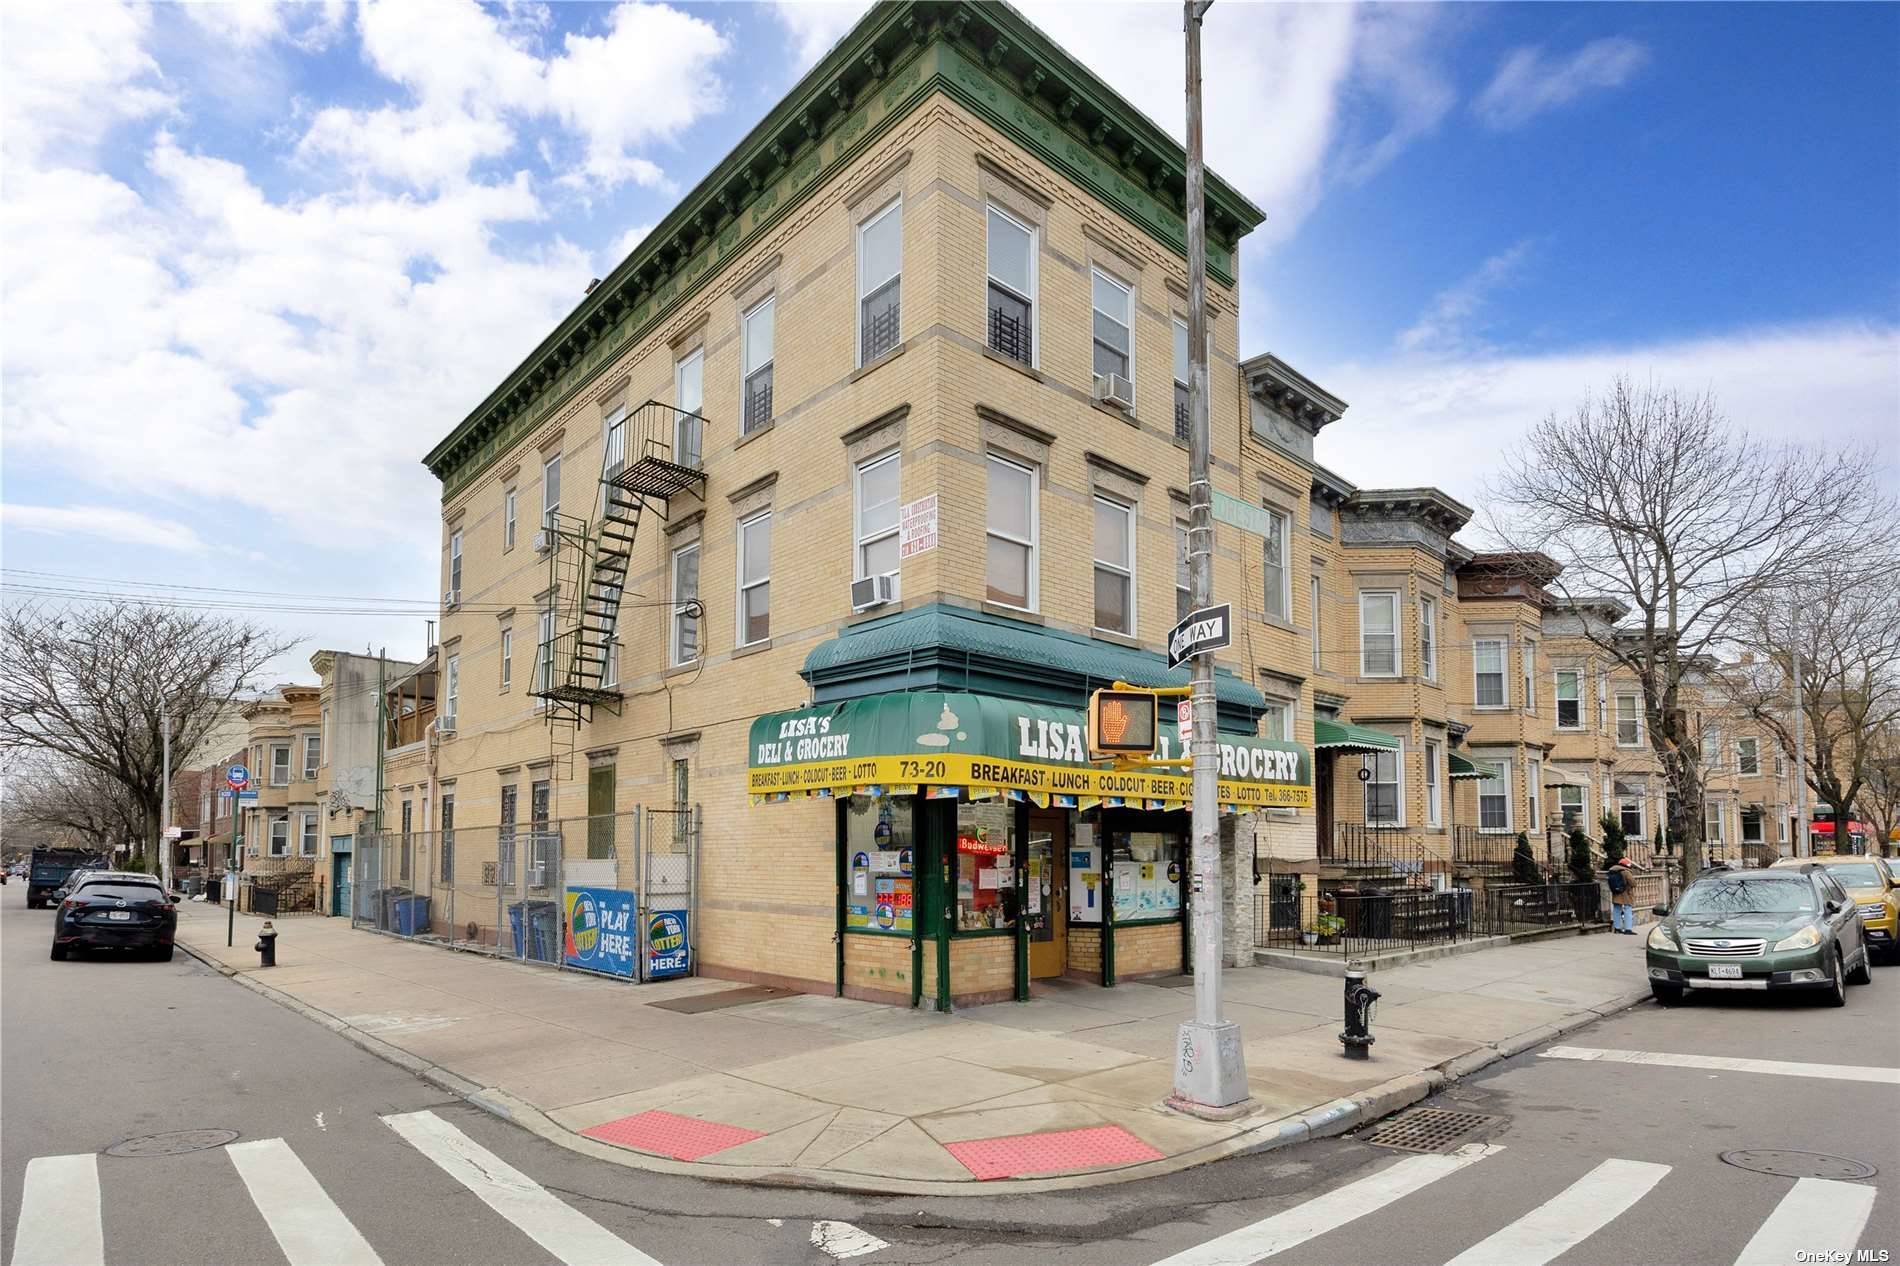 Wonderful opportunity to enhance your investment portfolio with this perfectly positioned mixed use corner property located in highly desirable Ridgewood Queens.